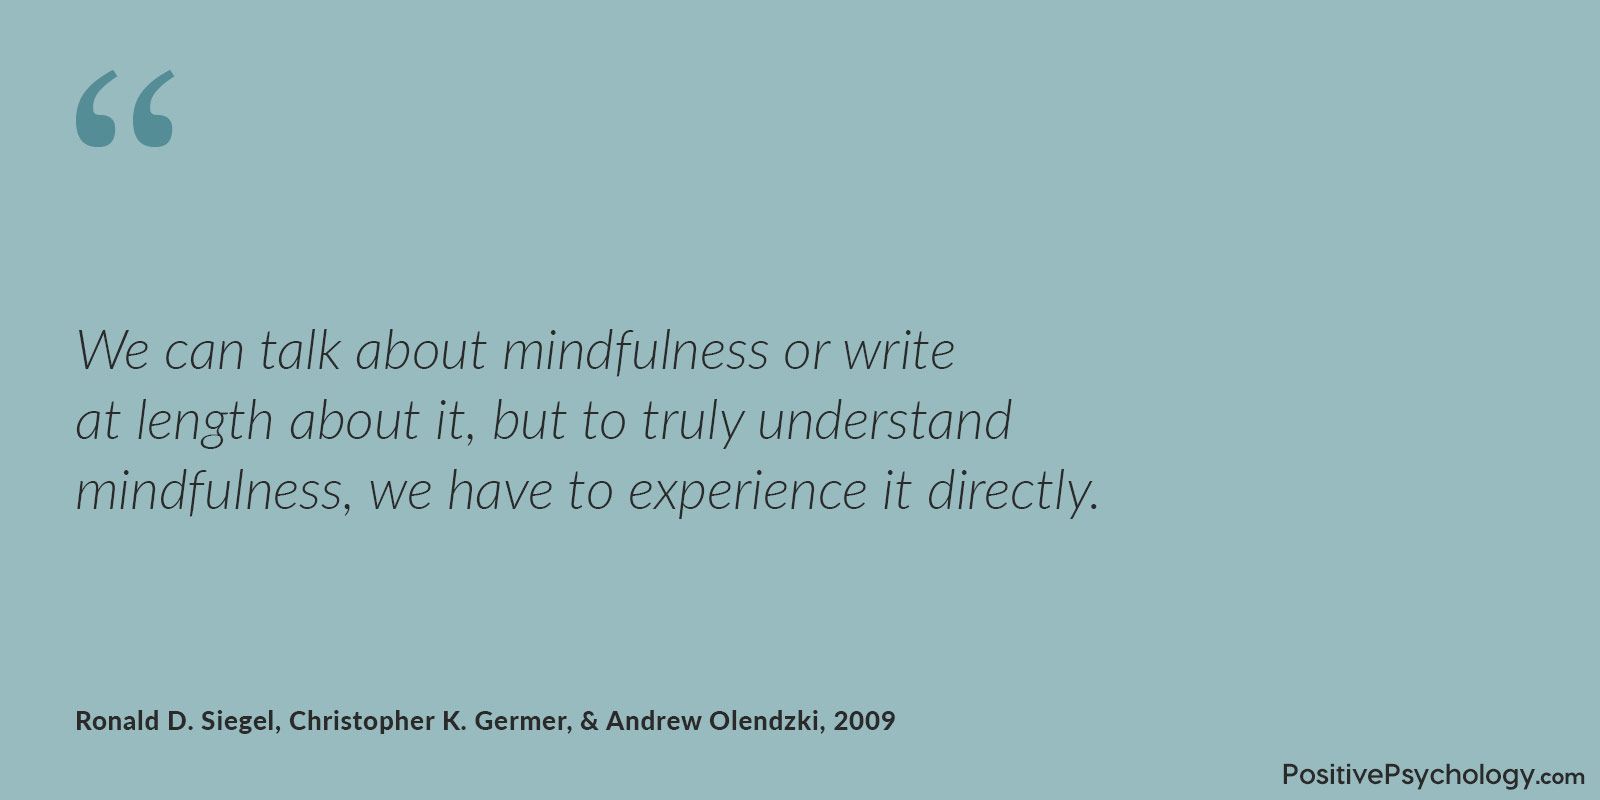 Mindfulness Experience